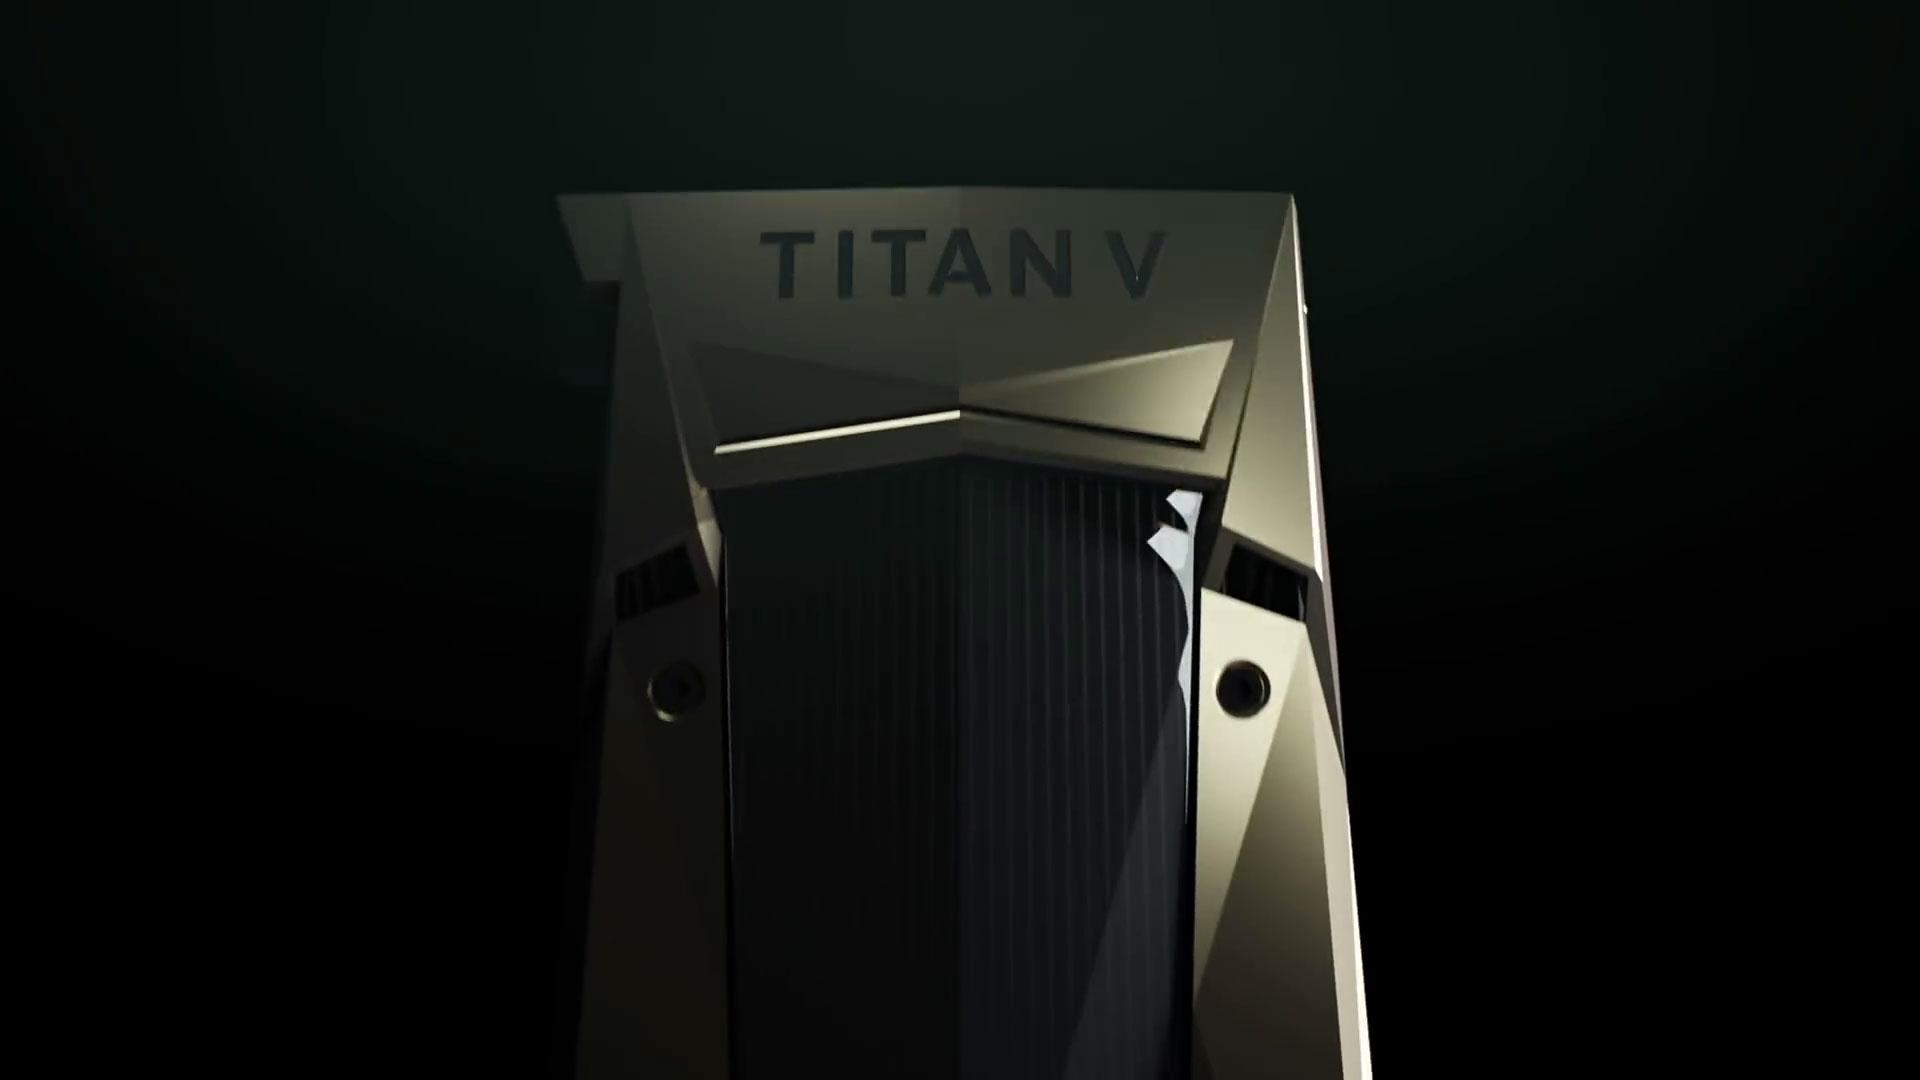 Here are early Titan V benchmarks